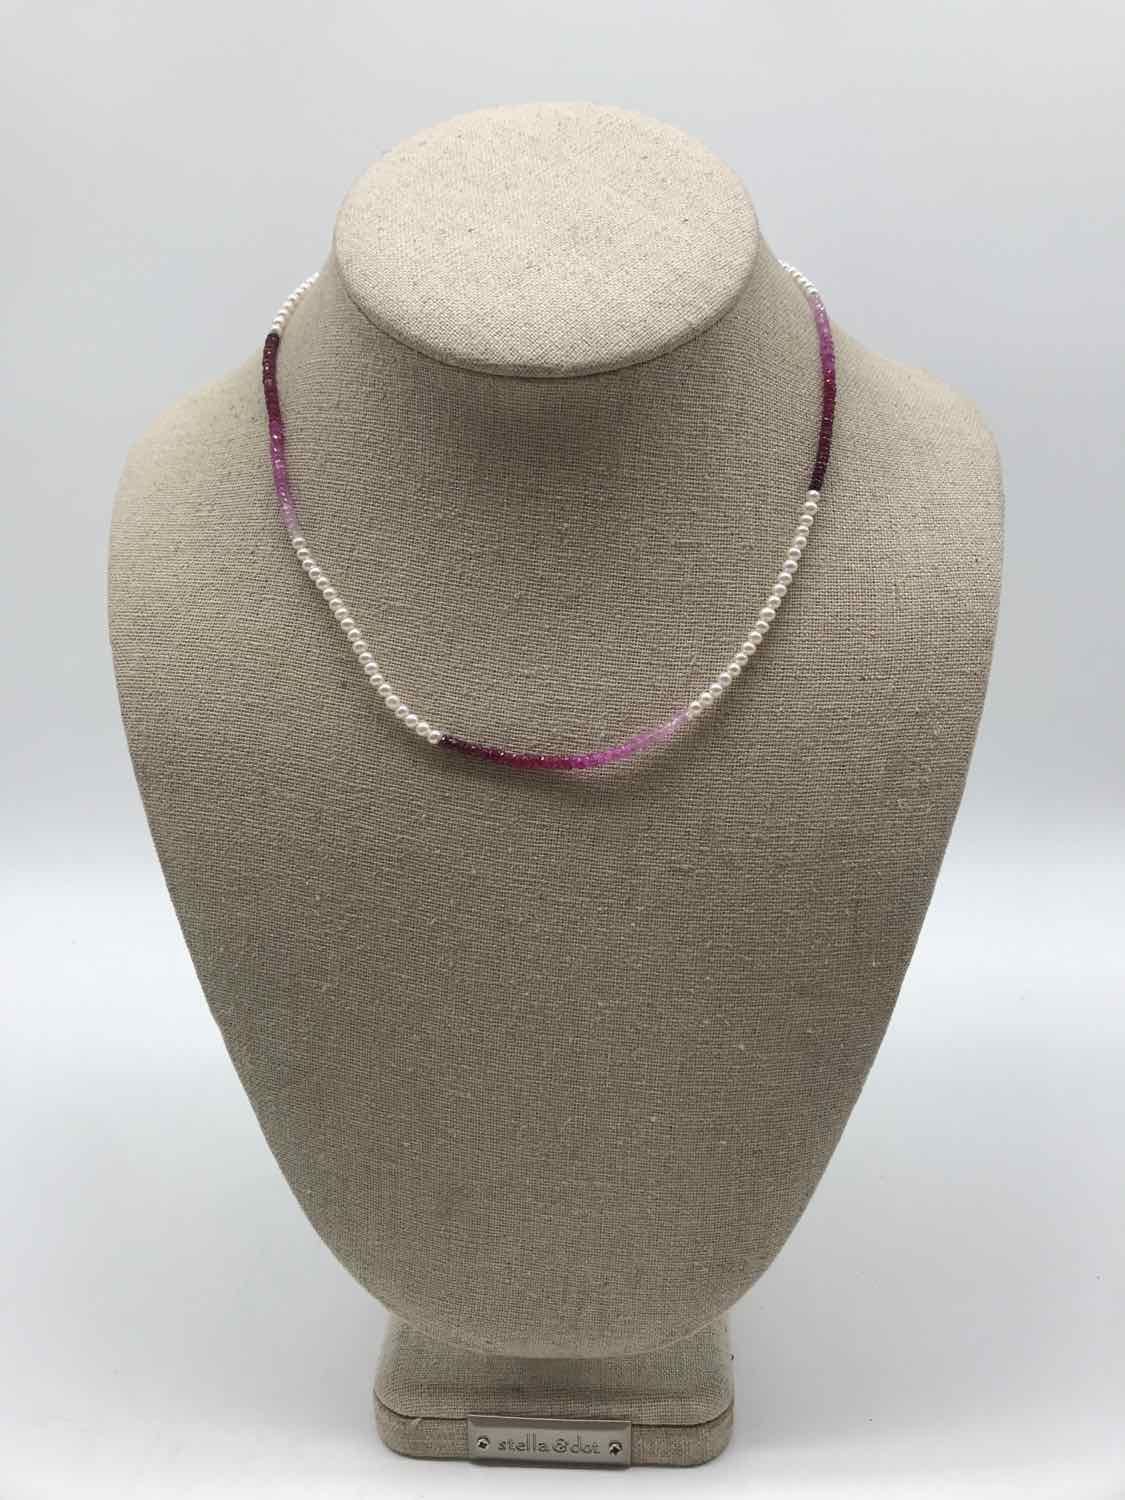 14 Kt Gold Filled Pink Sapphire Beaded Necklace